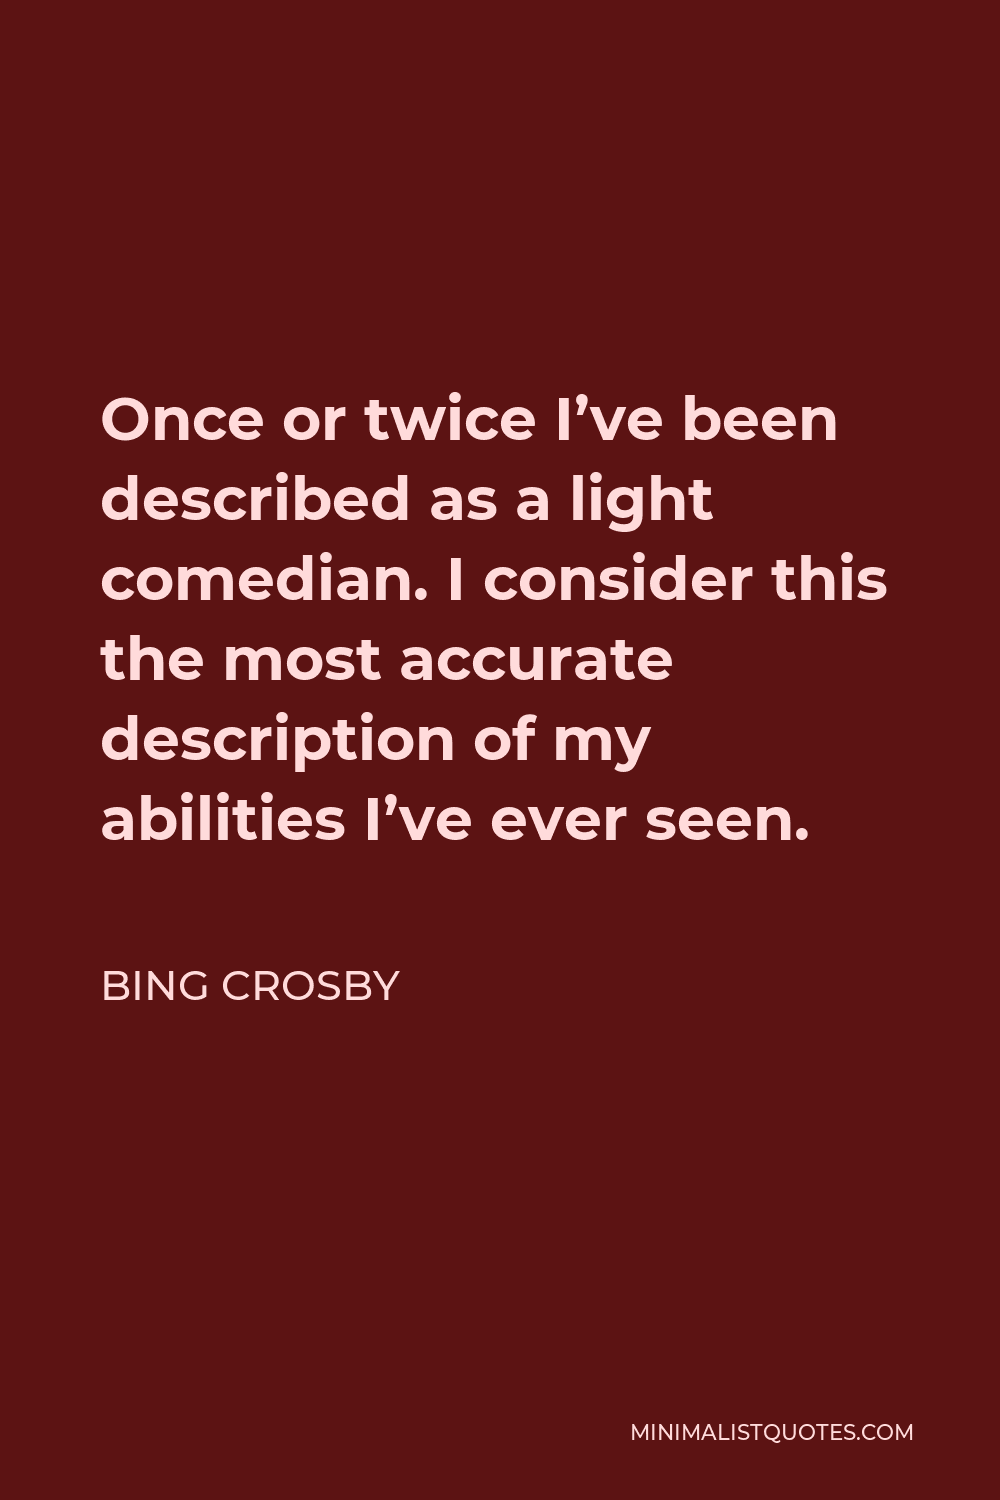 Bing Crosby Quote - Once or twice I’ve been described as a light comedian. I consider this the most accurate description of my abilities I’ve ever seen.